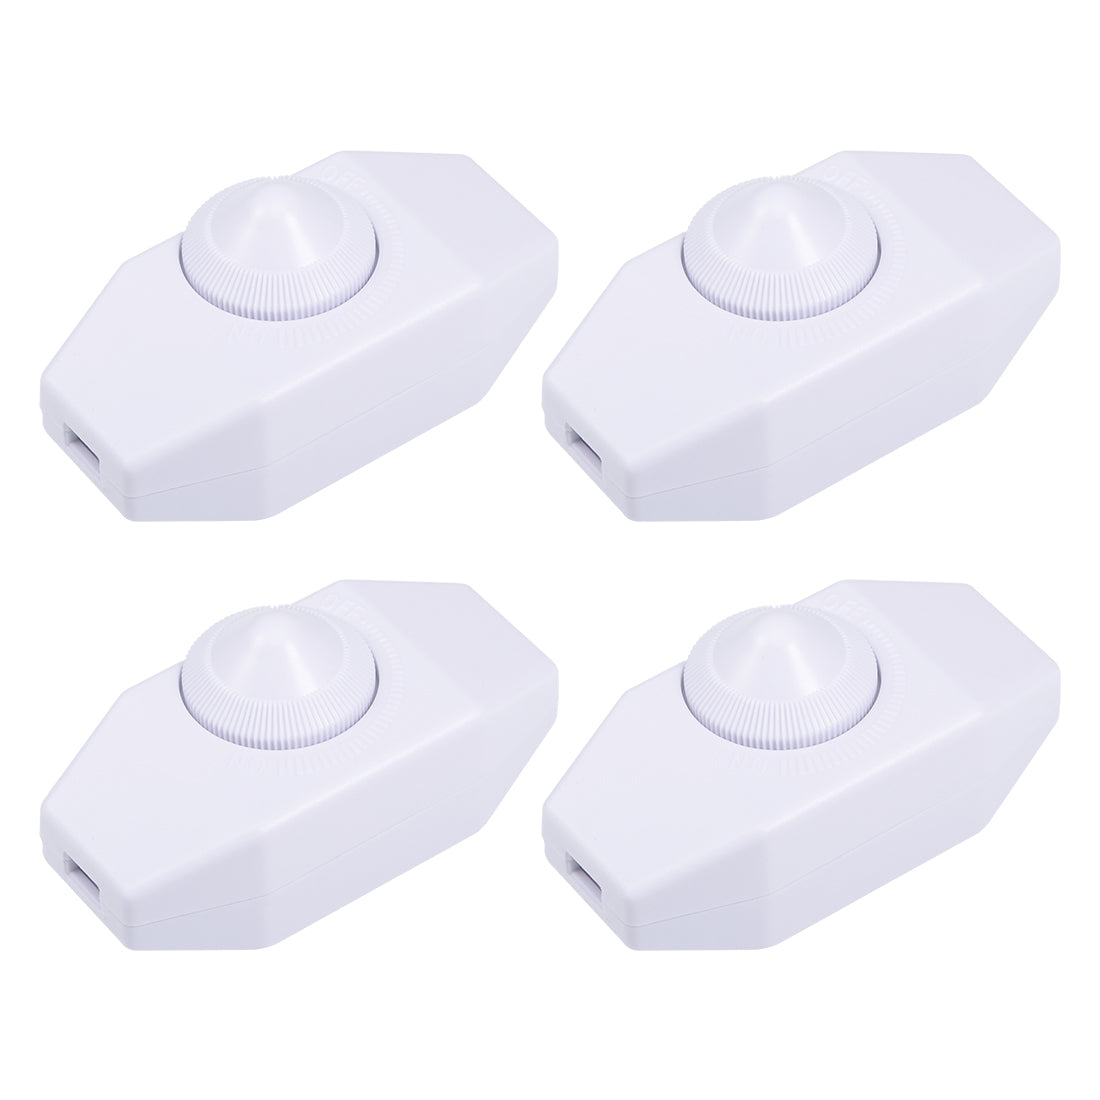 uxcell Uxcell Rotary Cord Switch AC 250V 2A Slide Control Lamp Dimmer 100-Watt White 4pcs